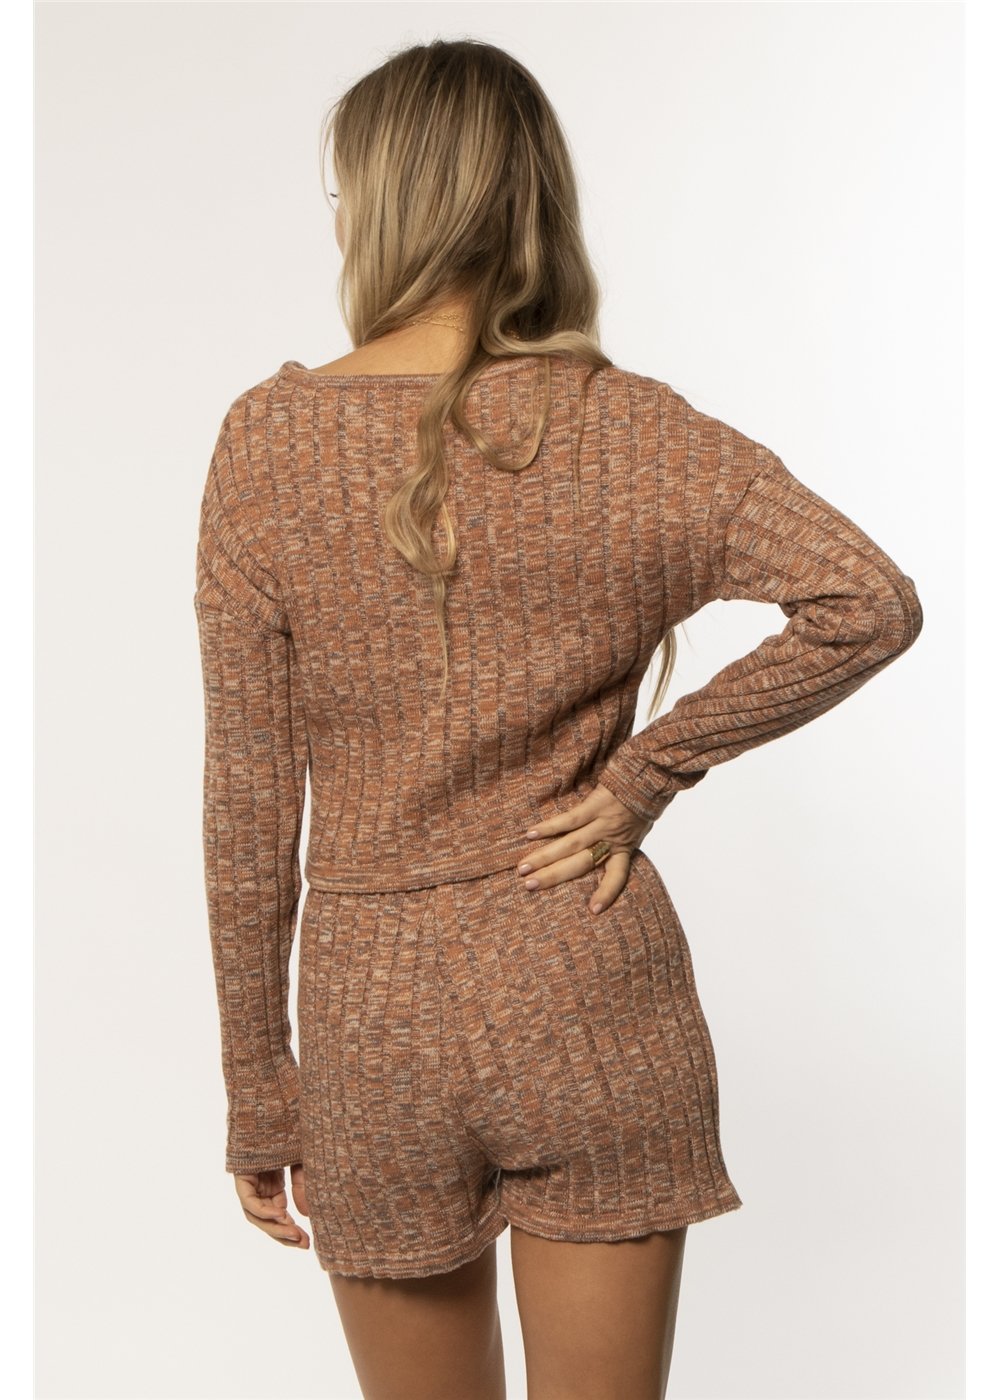 Amuse Society Women's Quincy Long Sleeve Sweater in Gingersnap. back view